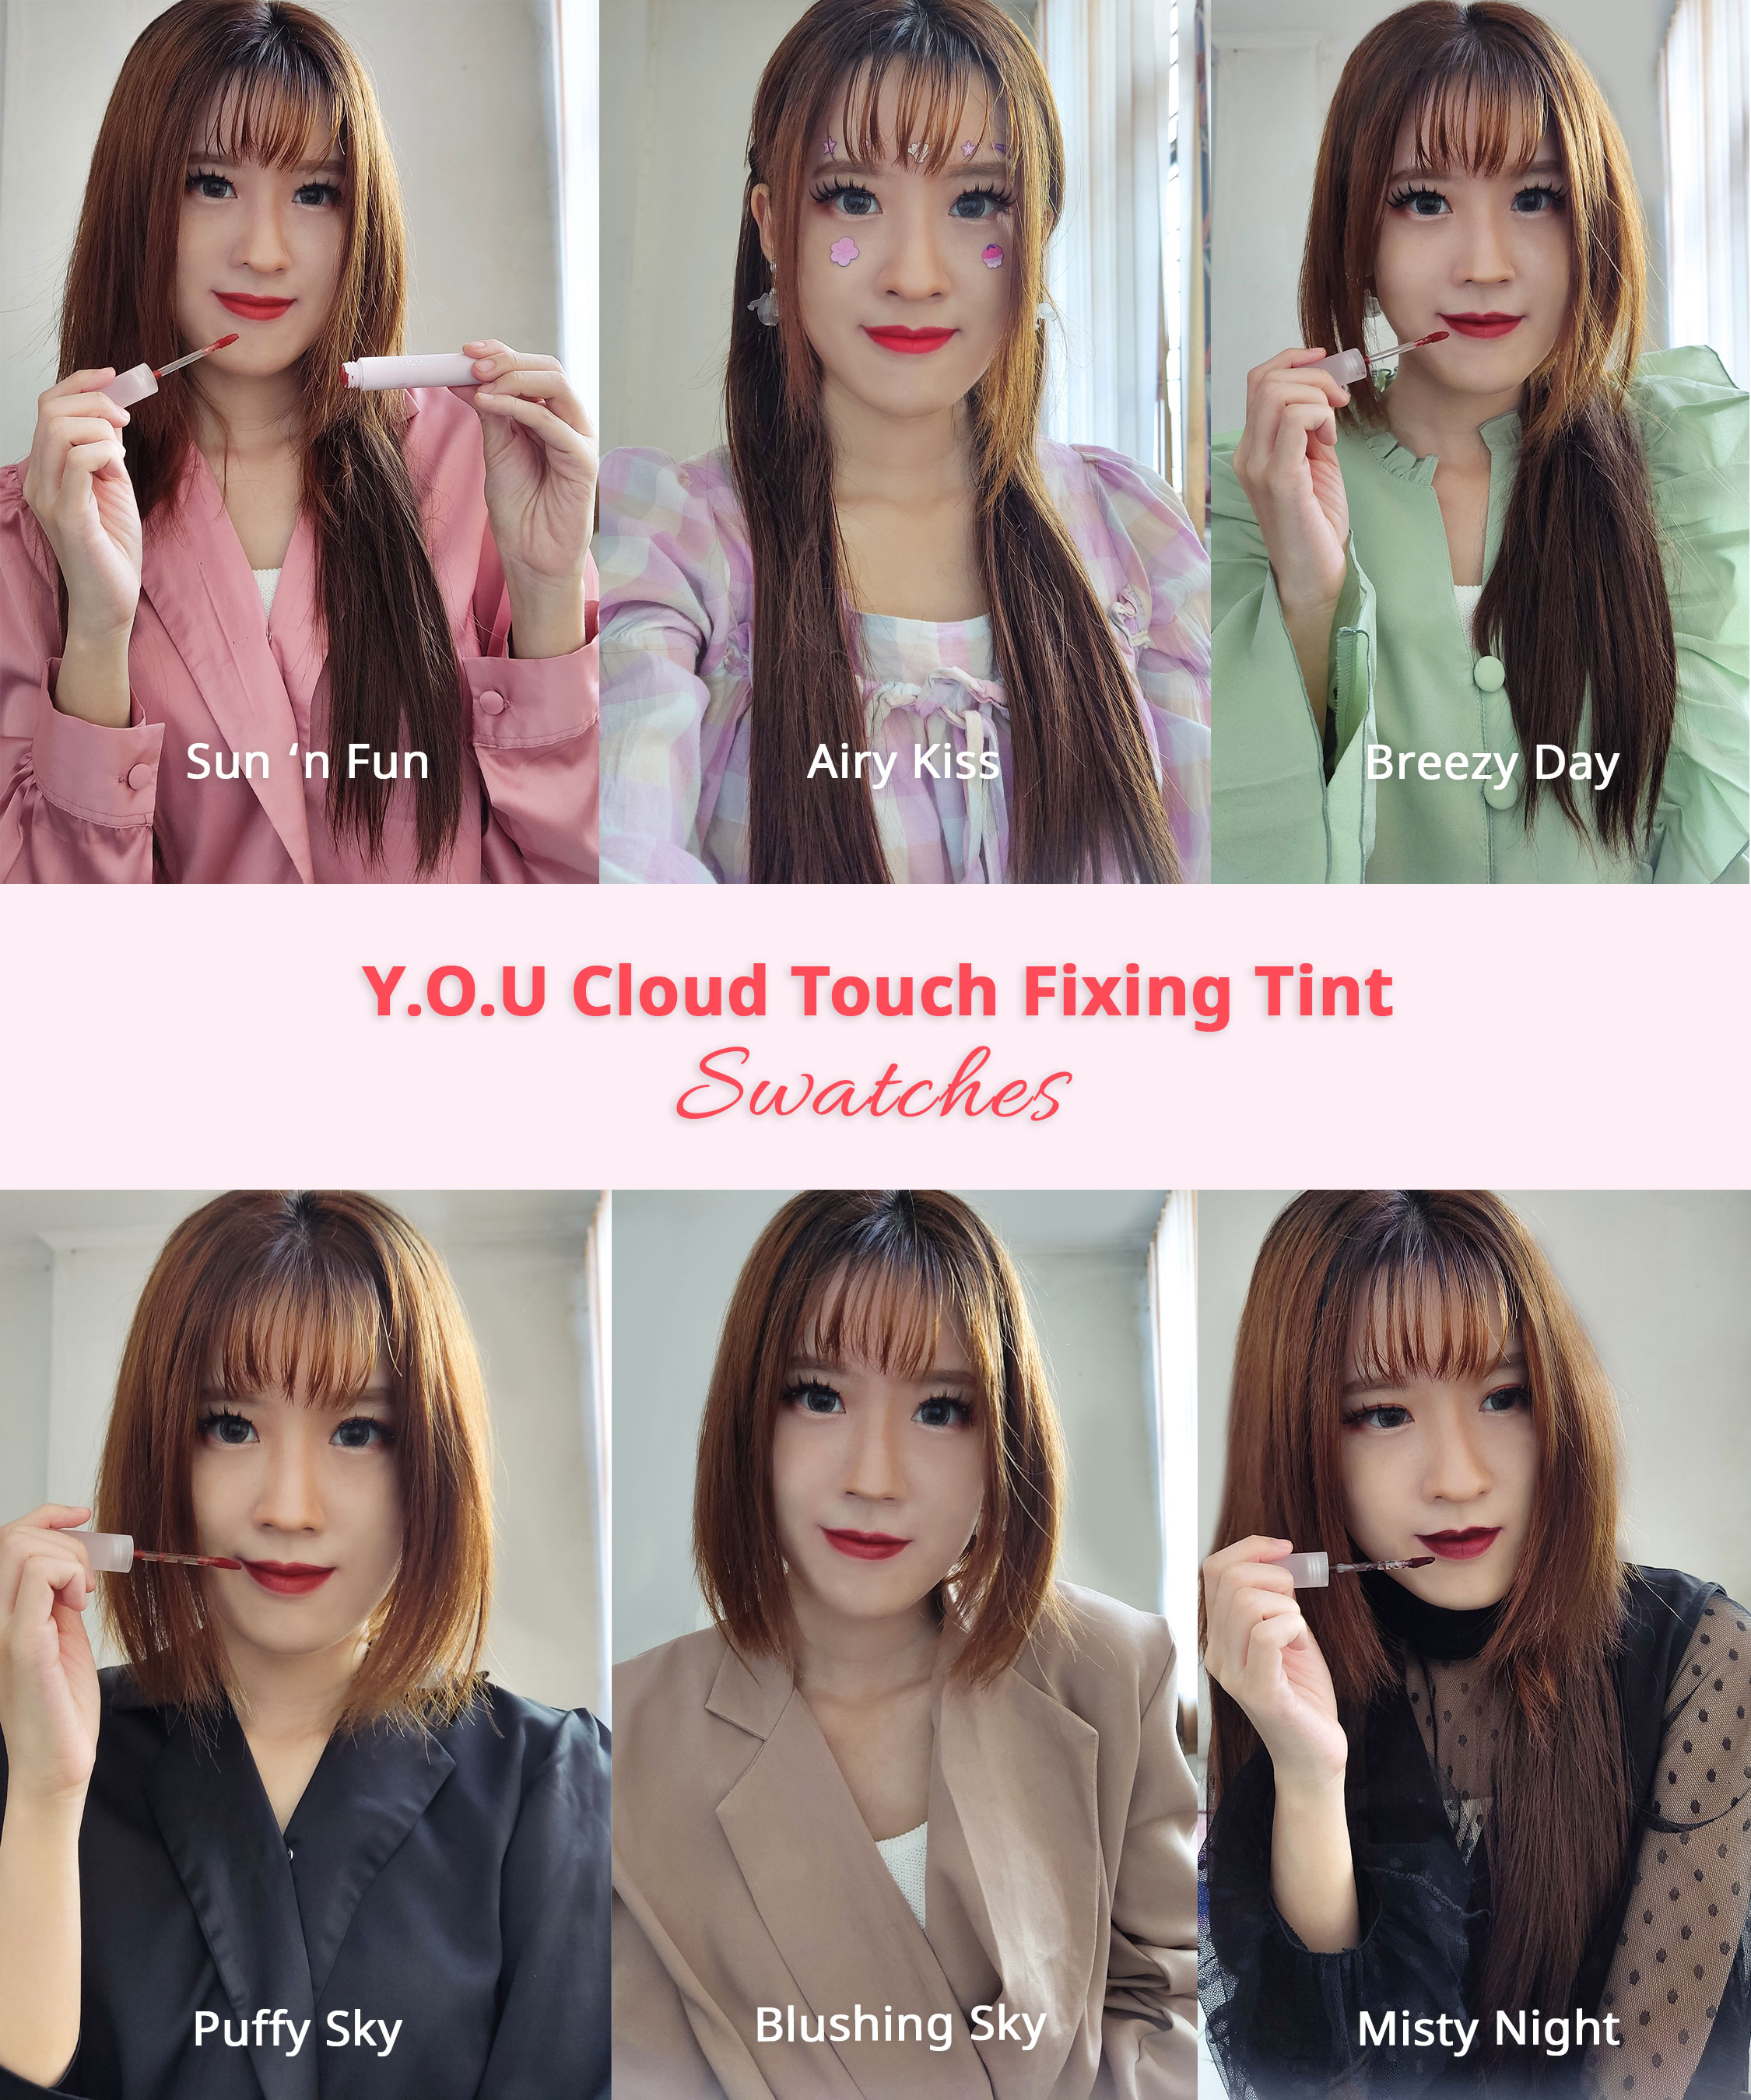 Y.O.U Cloud Touch Fixing Tint Review & Swatches